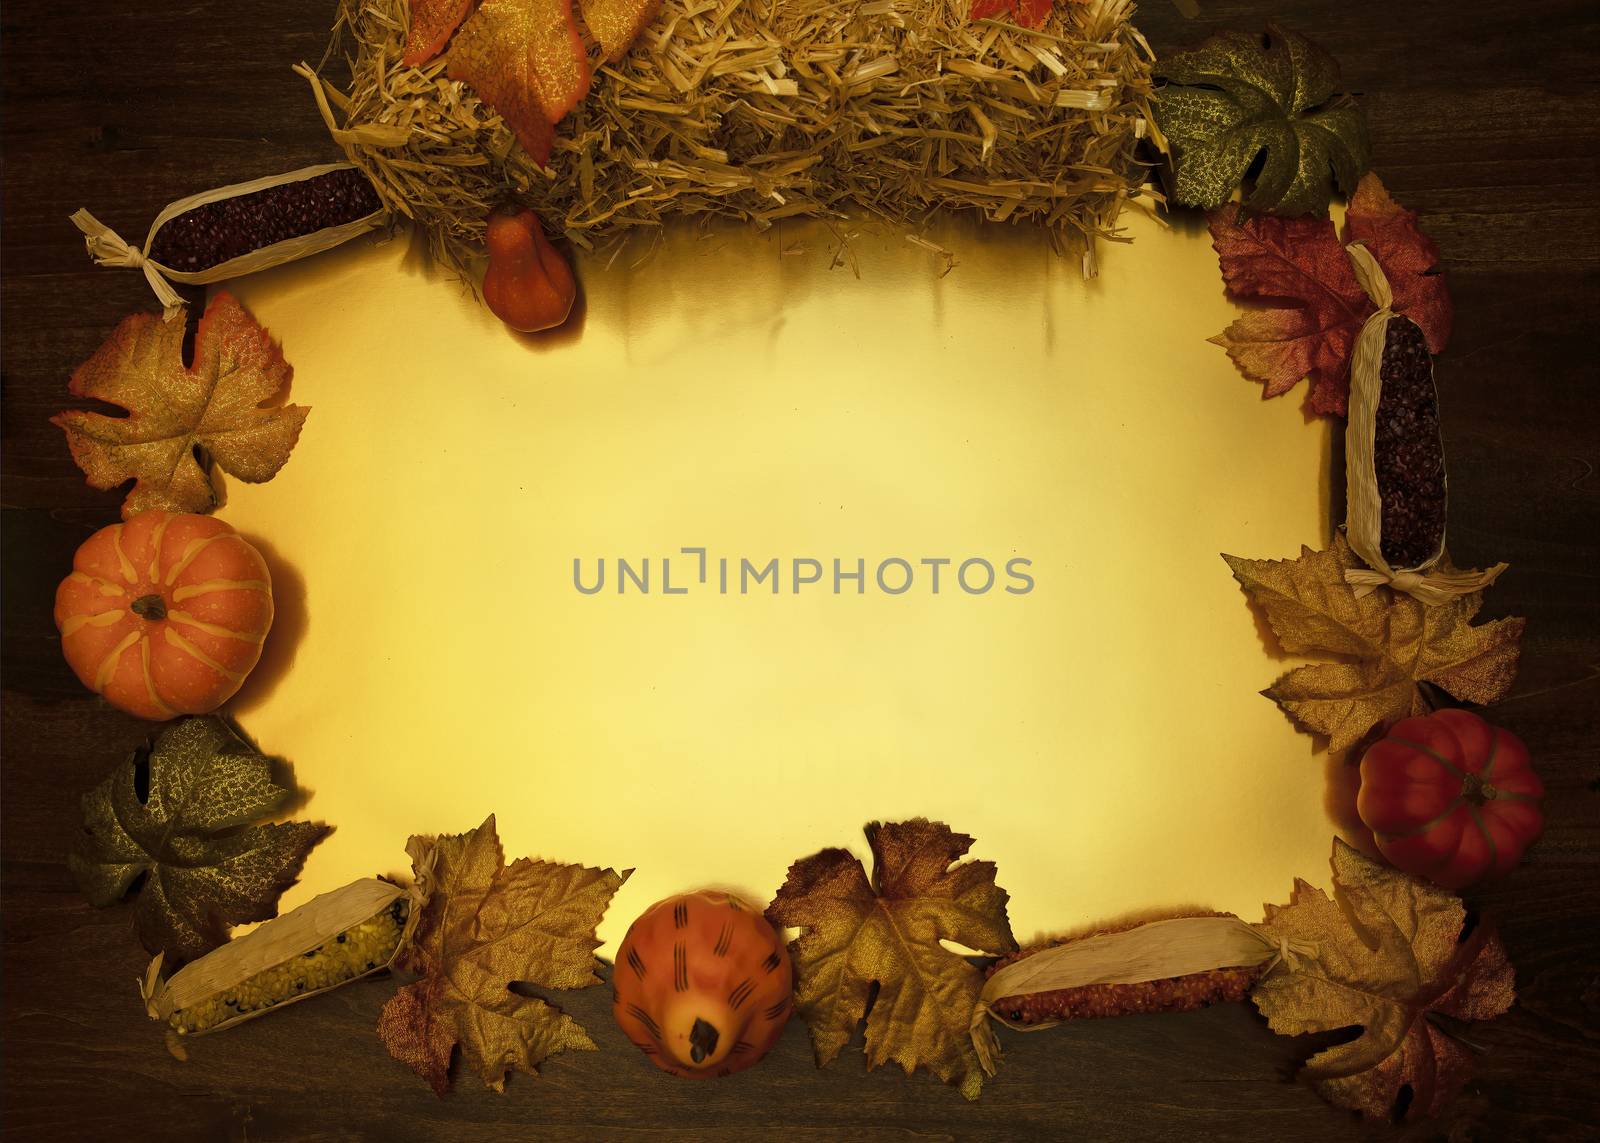 Flat lay frame formed by fall harvest items with gold center.